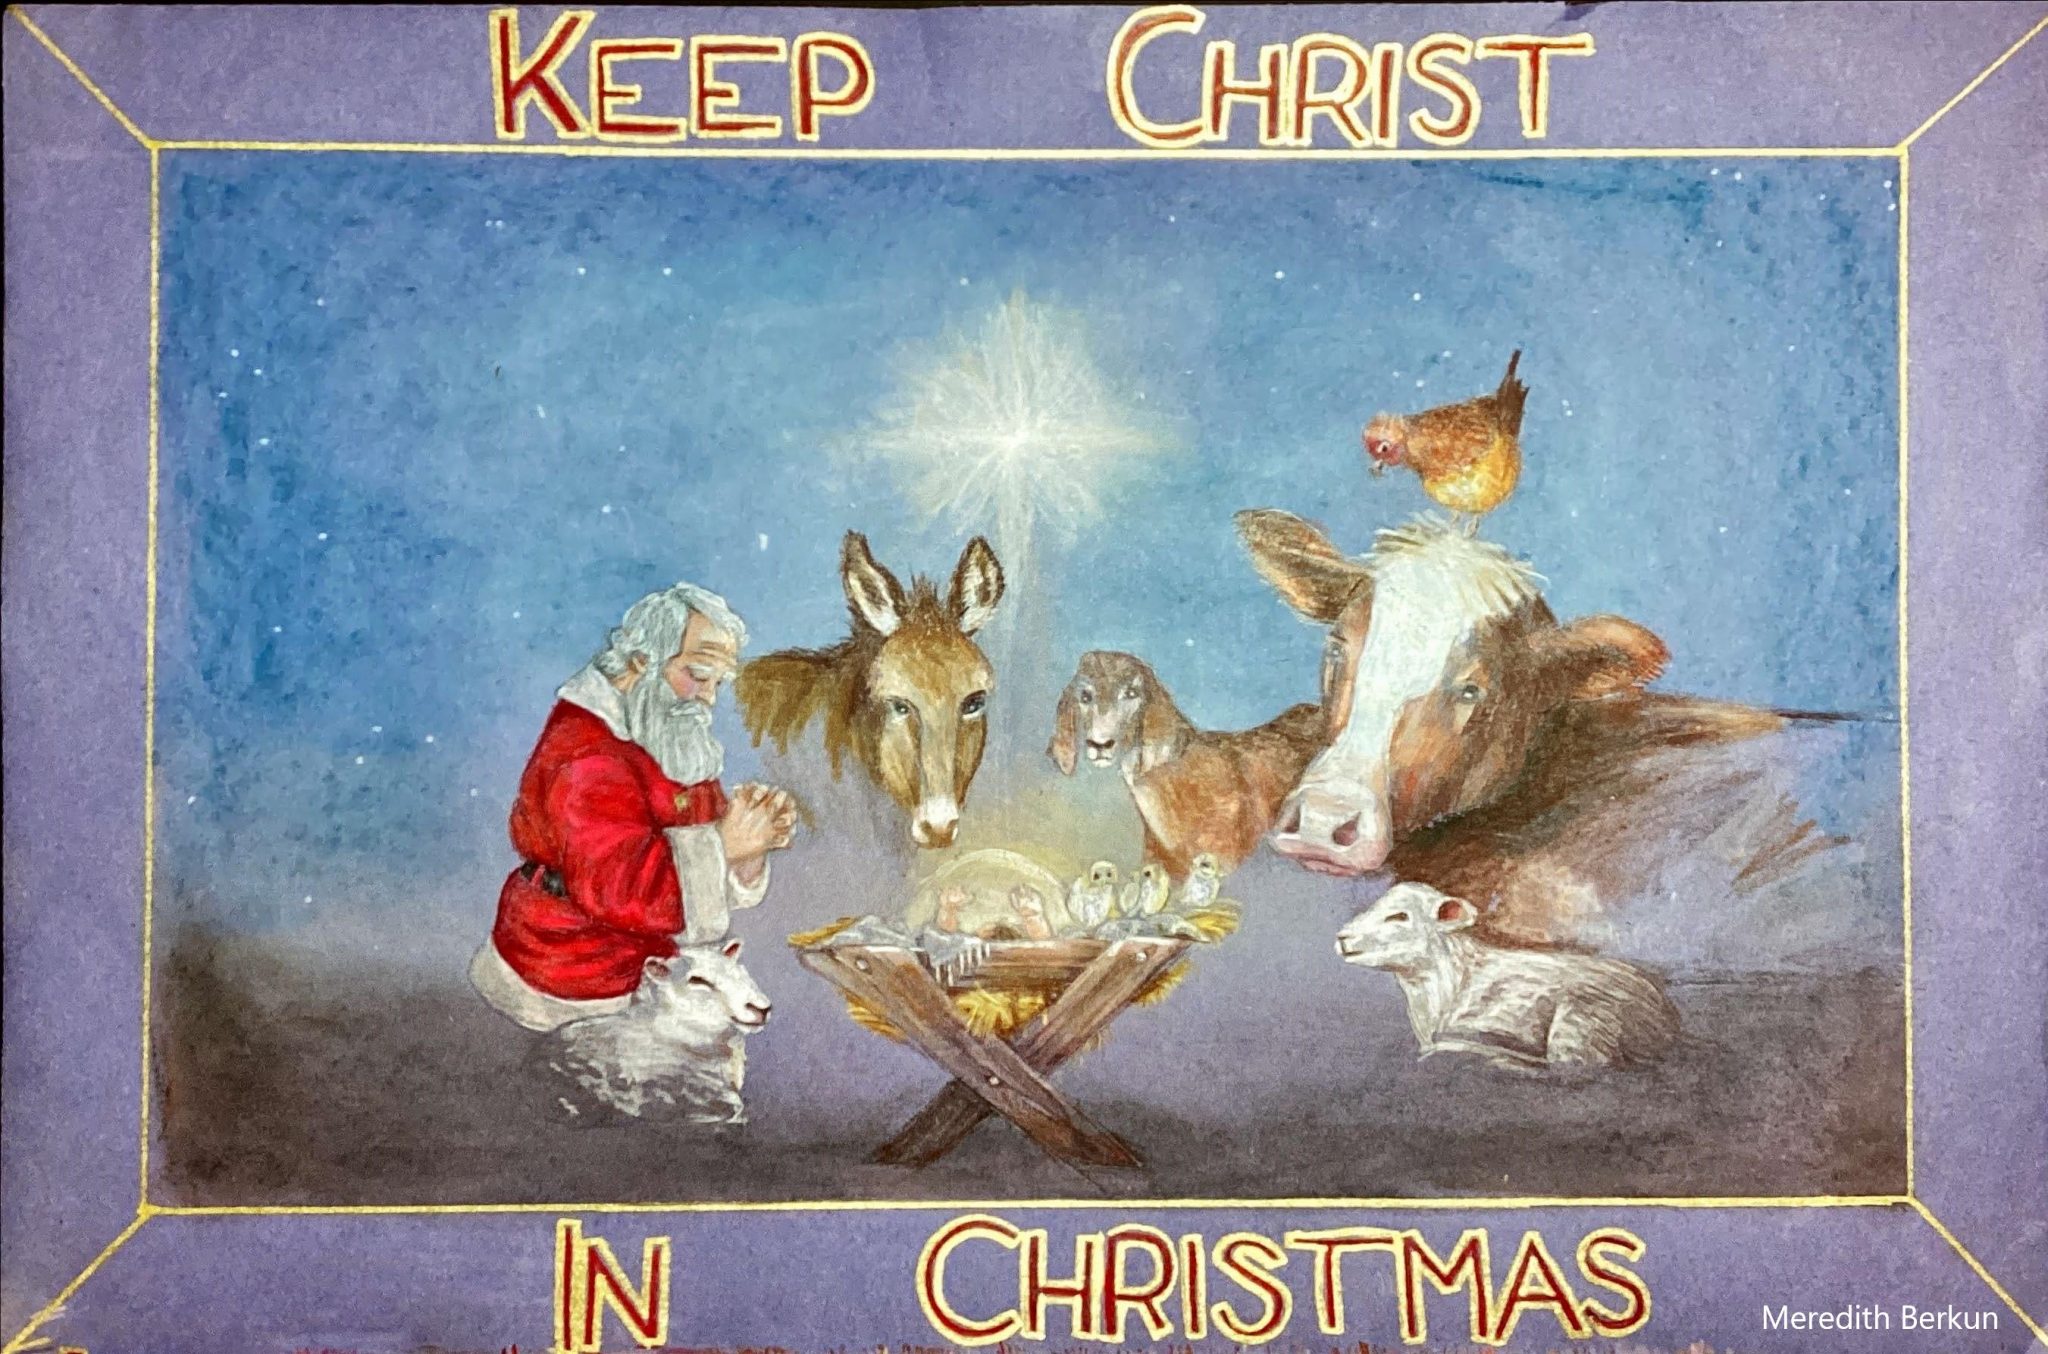 Keep Christ in Christmas Poster Contest Cheshire Knights of Columbus